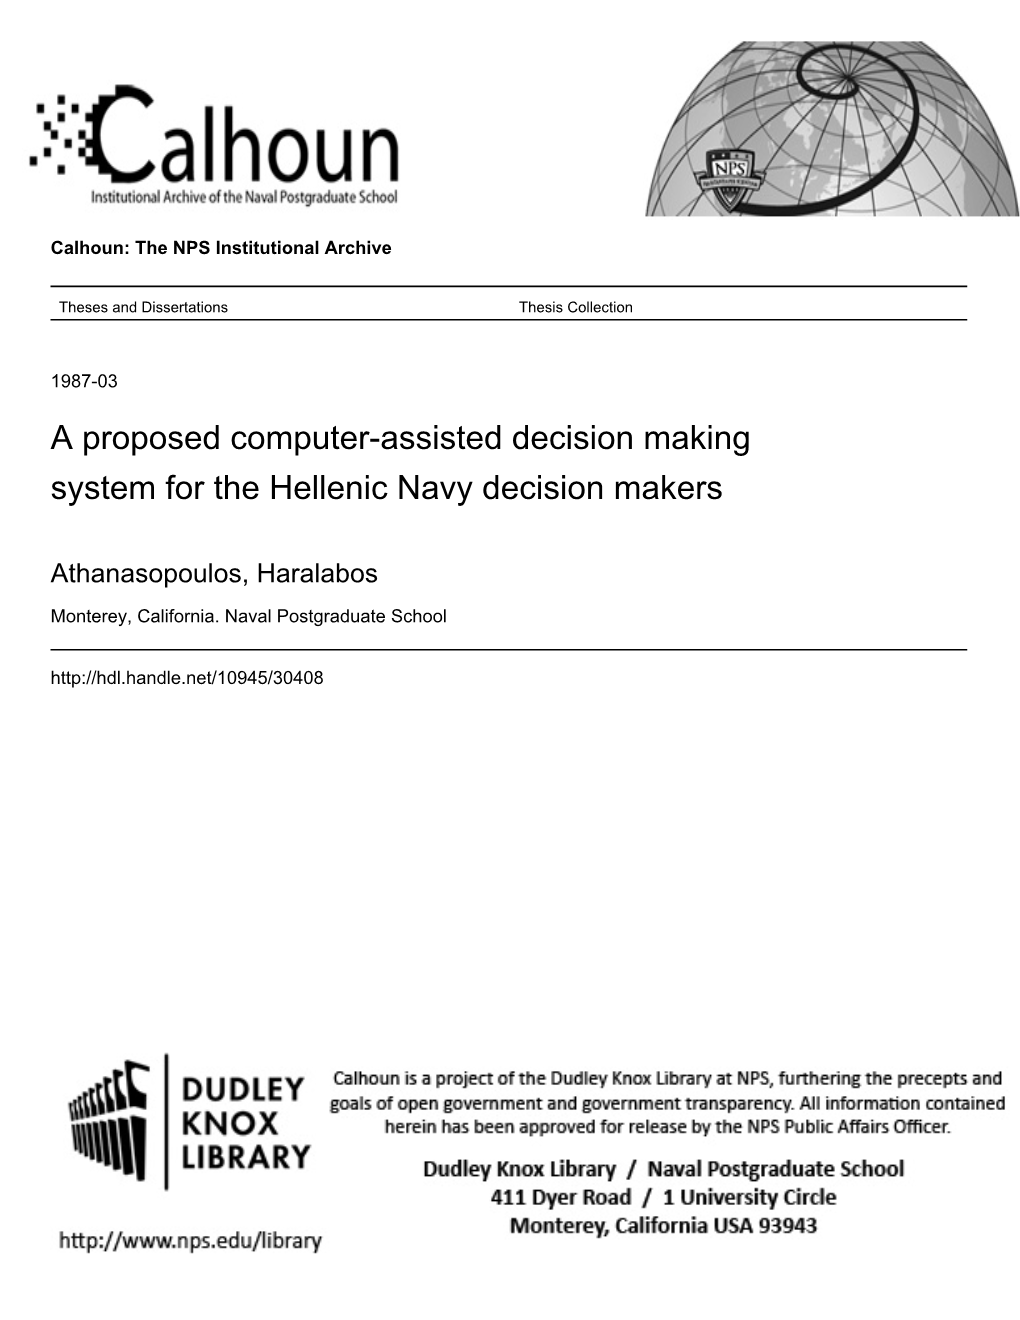 A Proposed Computer-Assisted Decision Making System for the Hellenic Navy Decision Makers